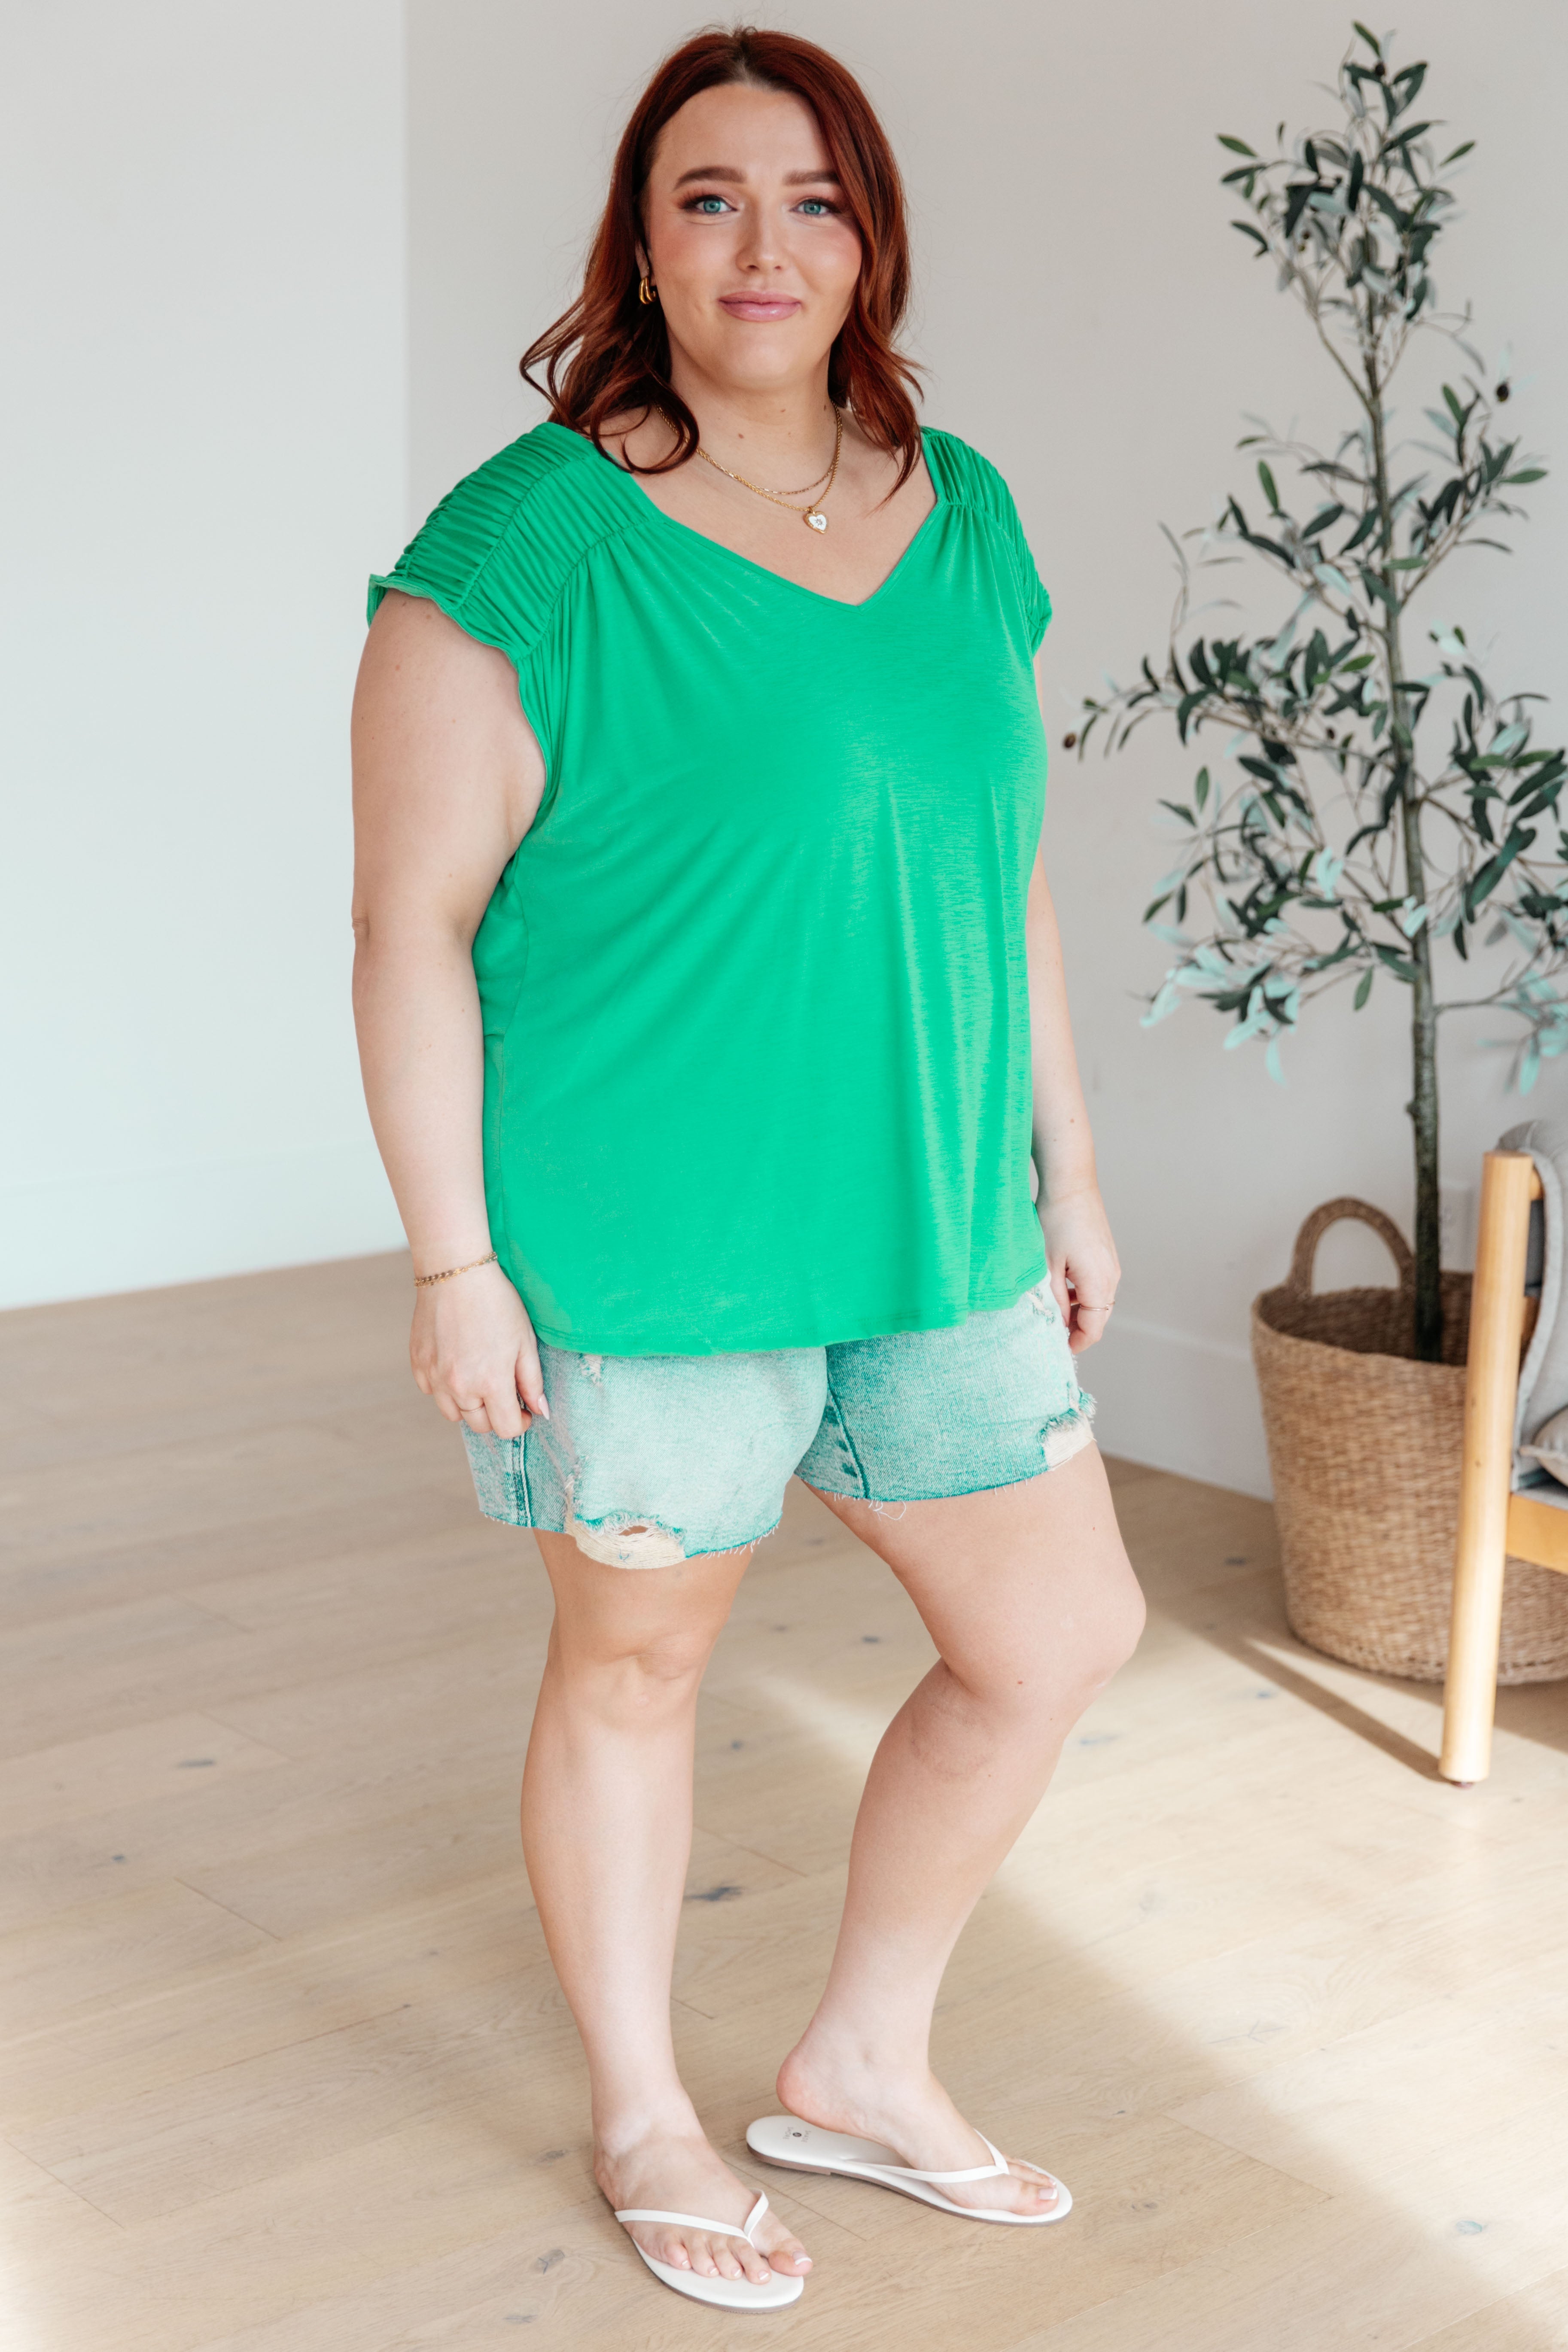 Ruched Cap Sleeve Top in Emerald Ave Shops